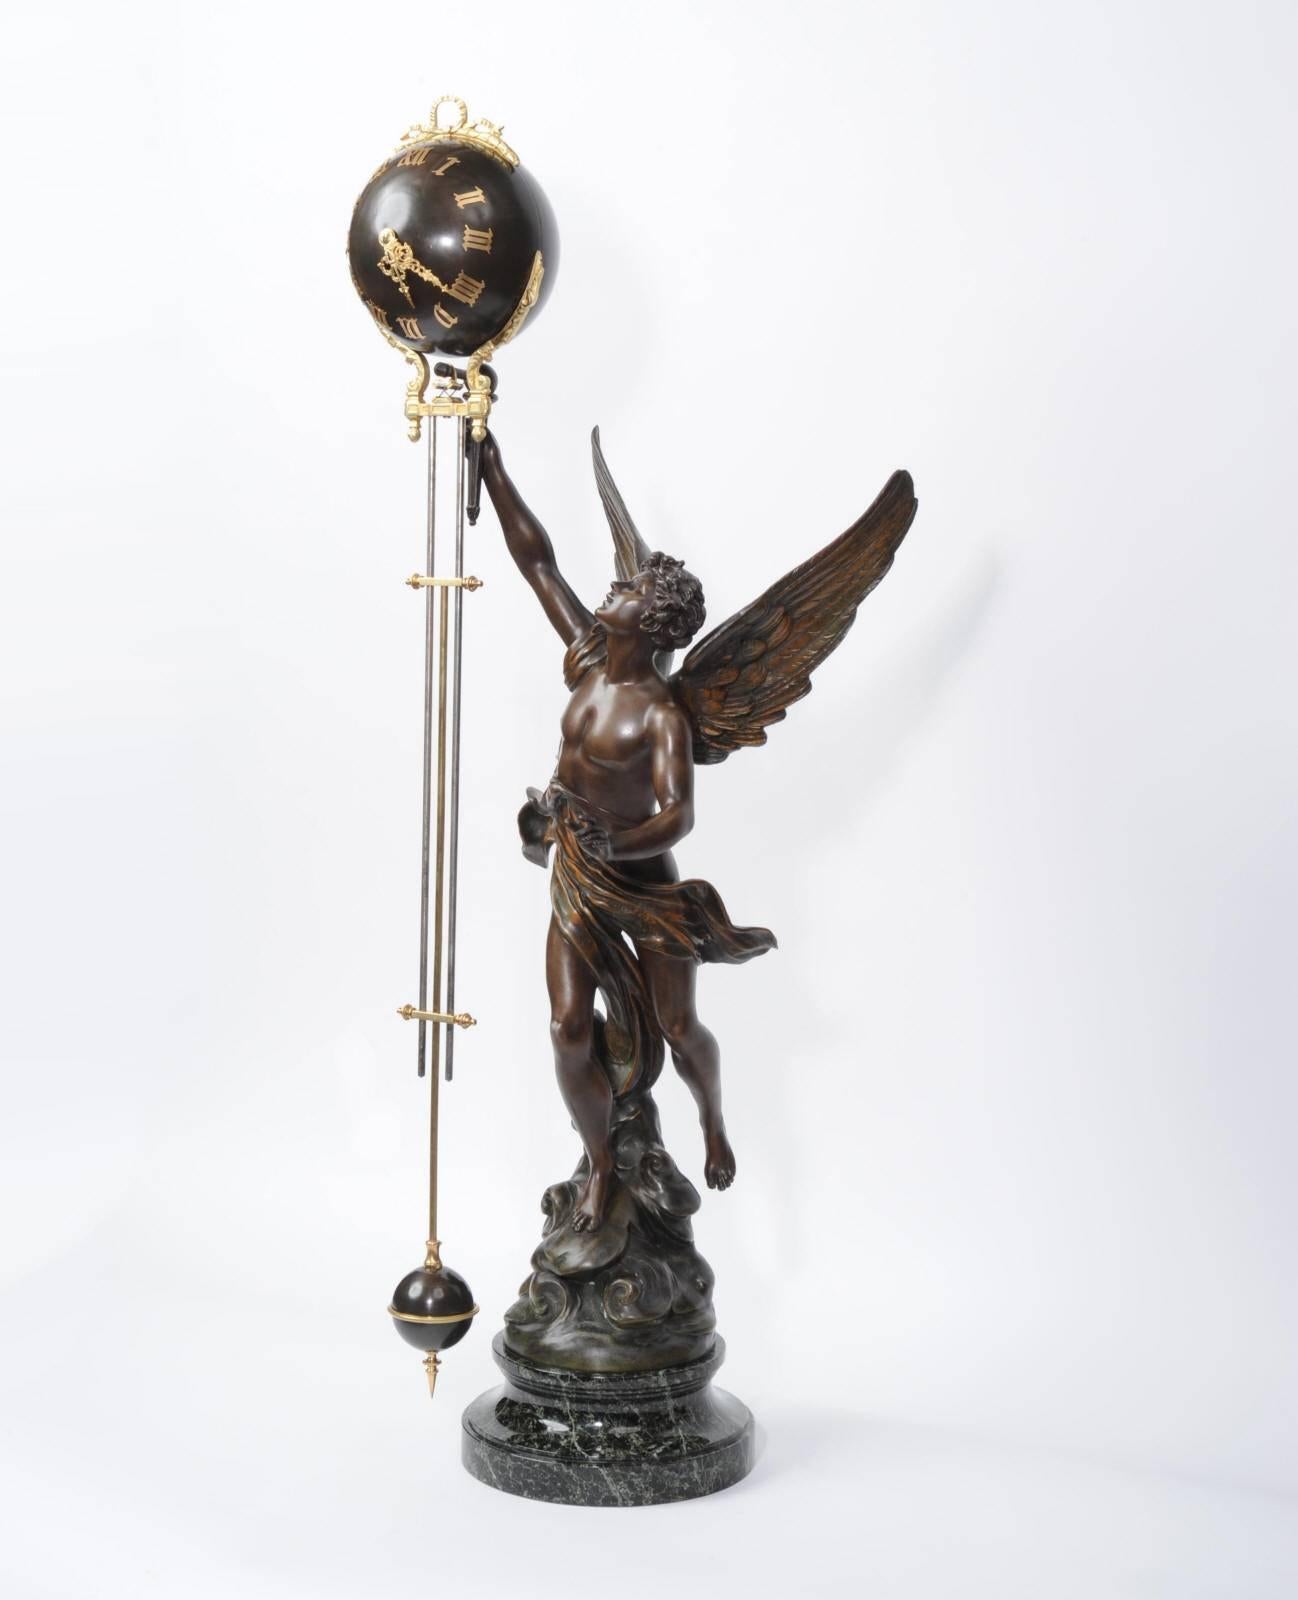 Standing at 3 1/2 ft in height this is the rare large version of the French swinging mystery clock. The figure is La Victoire by Émile Bruchon, beautifully and boldly modelled in bronze patinated metal. He holds a loft the pendulum which swings